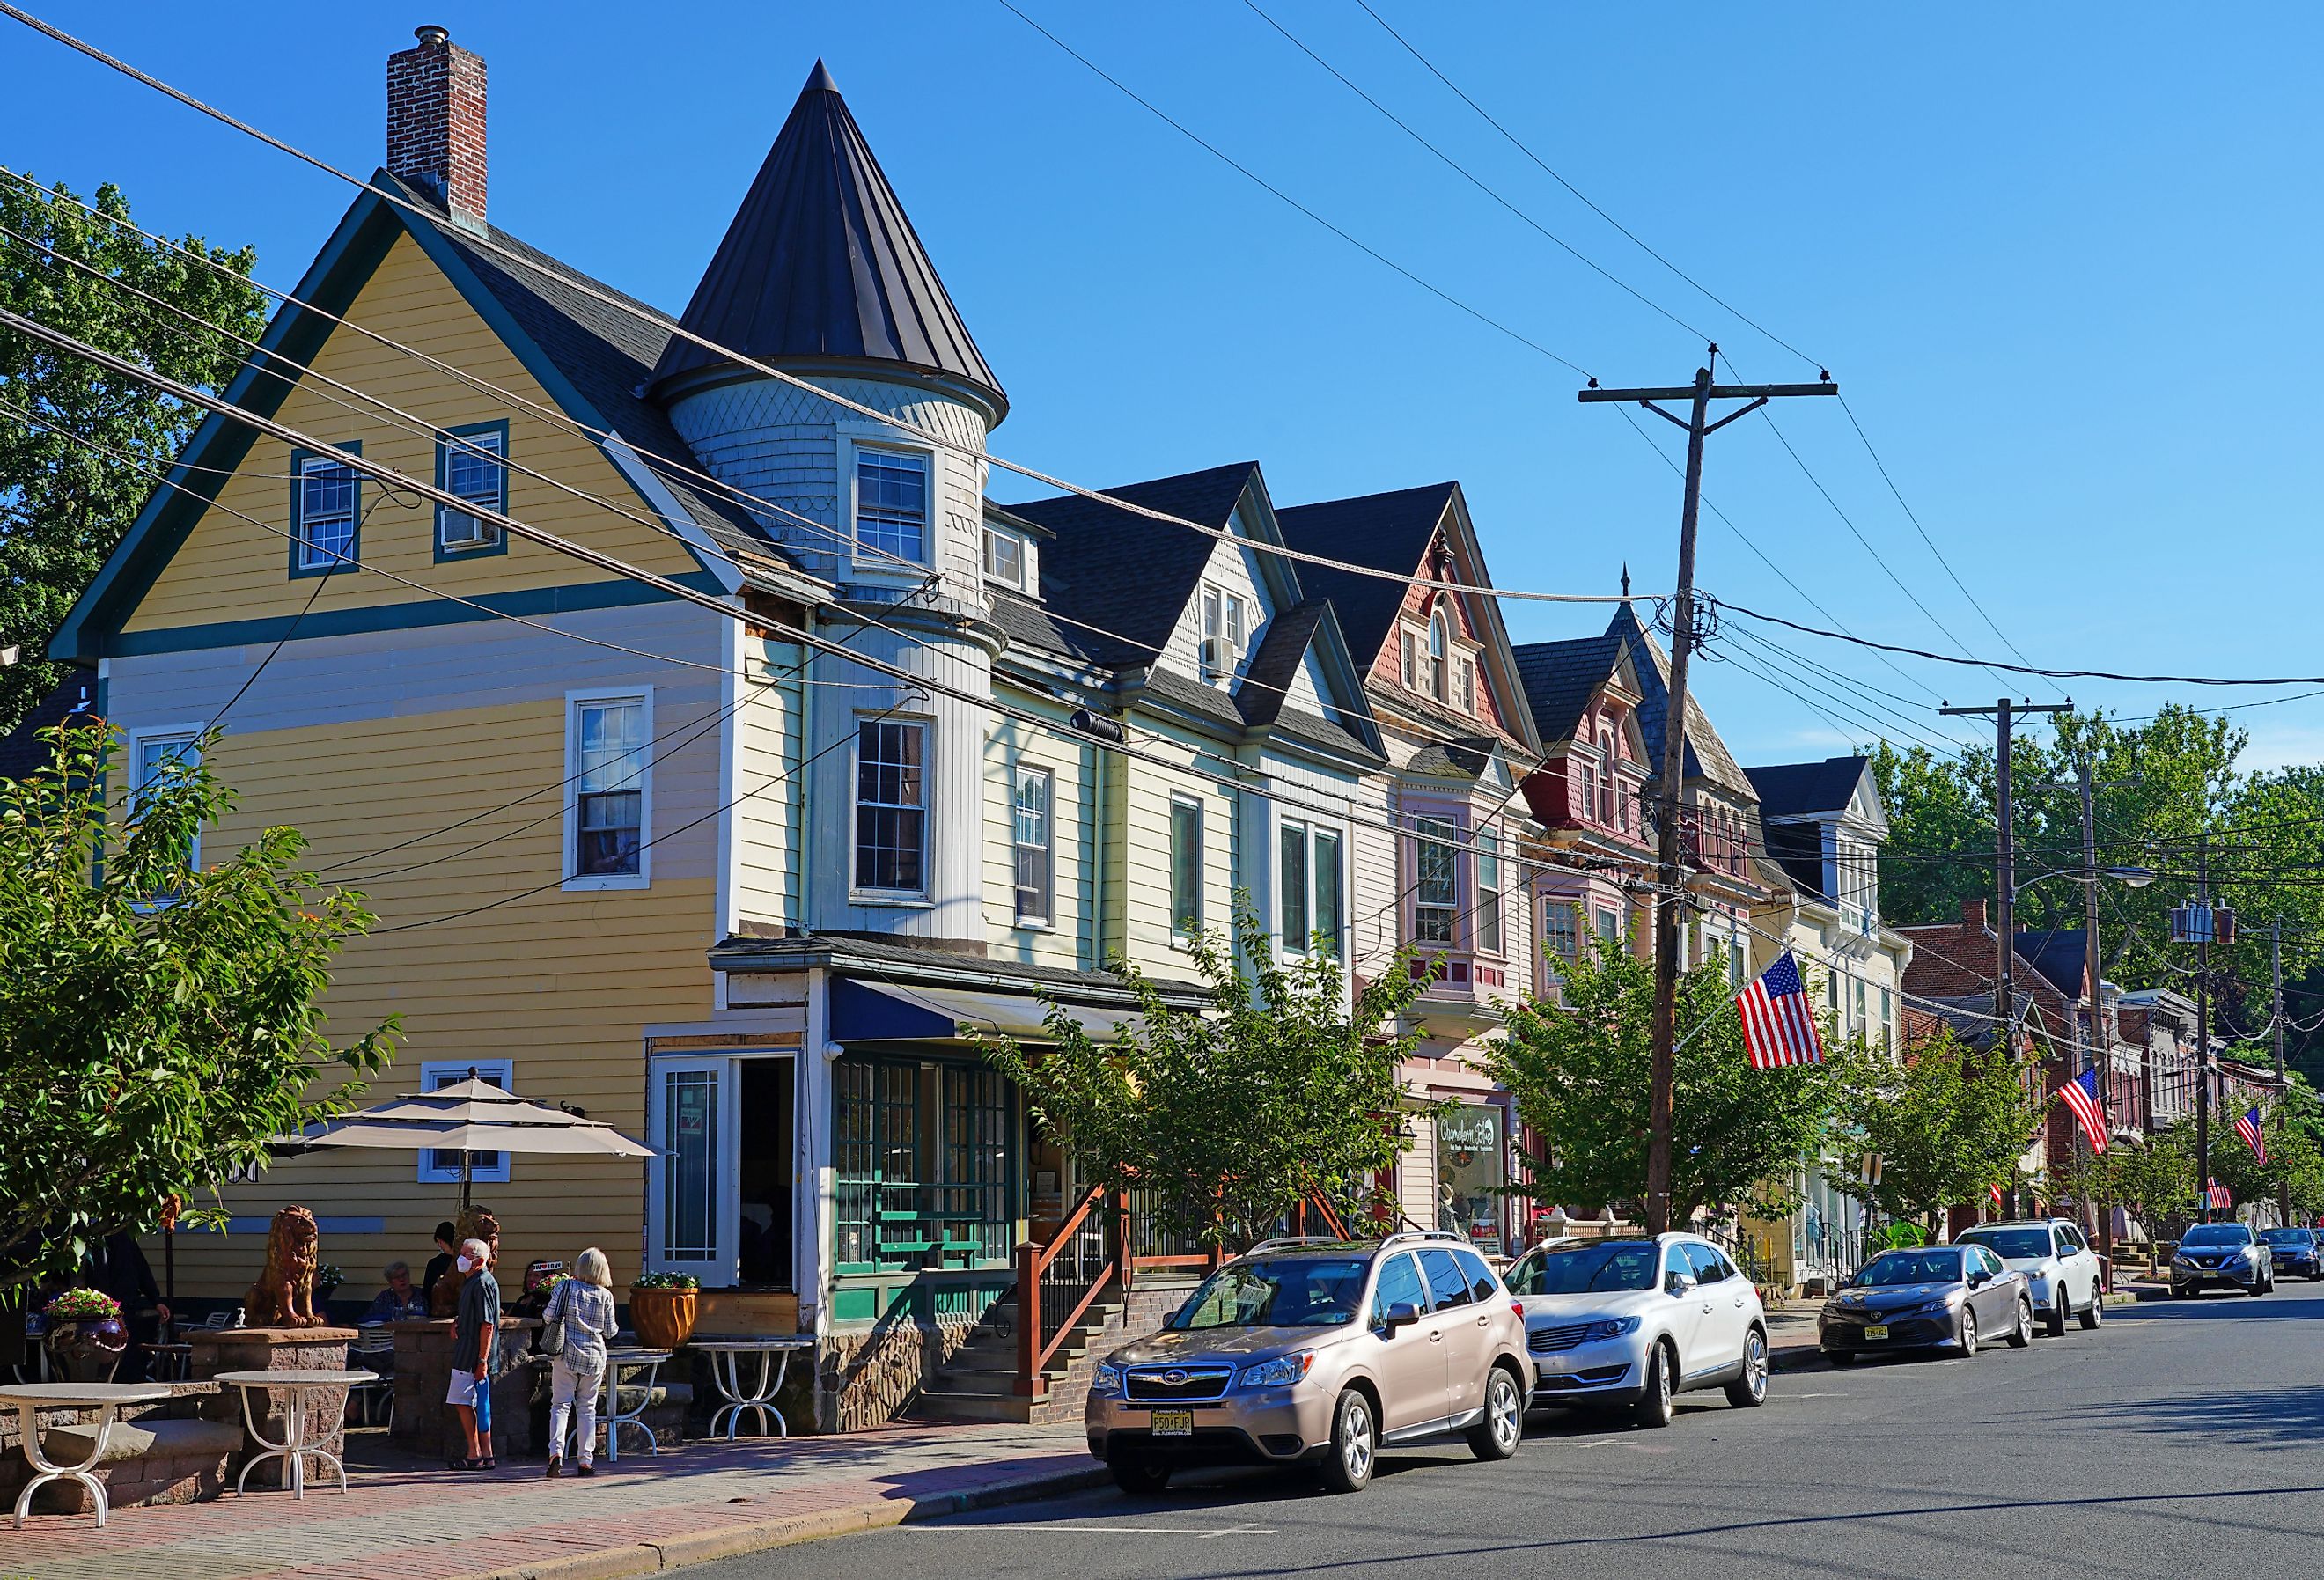 Historic buildings in downtown Clinton, New Jersey. Image credit EQRoy via Shutterstock